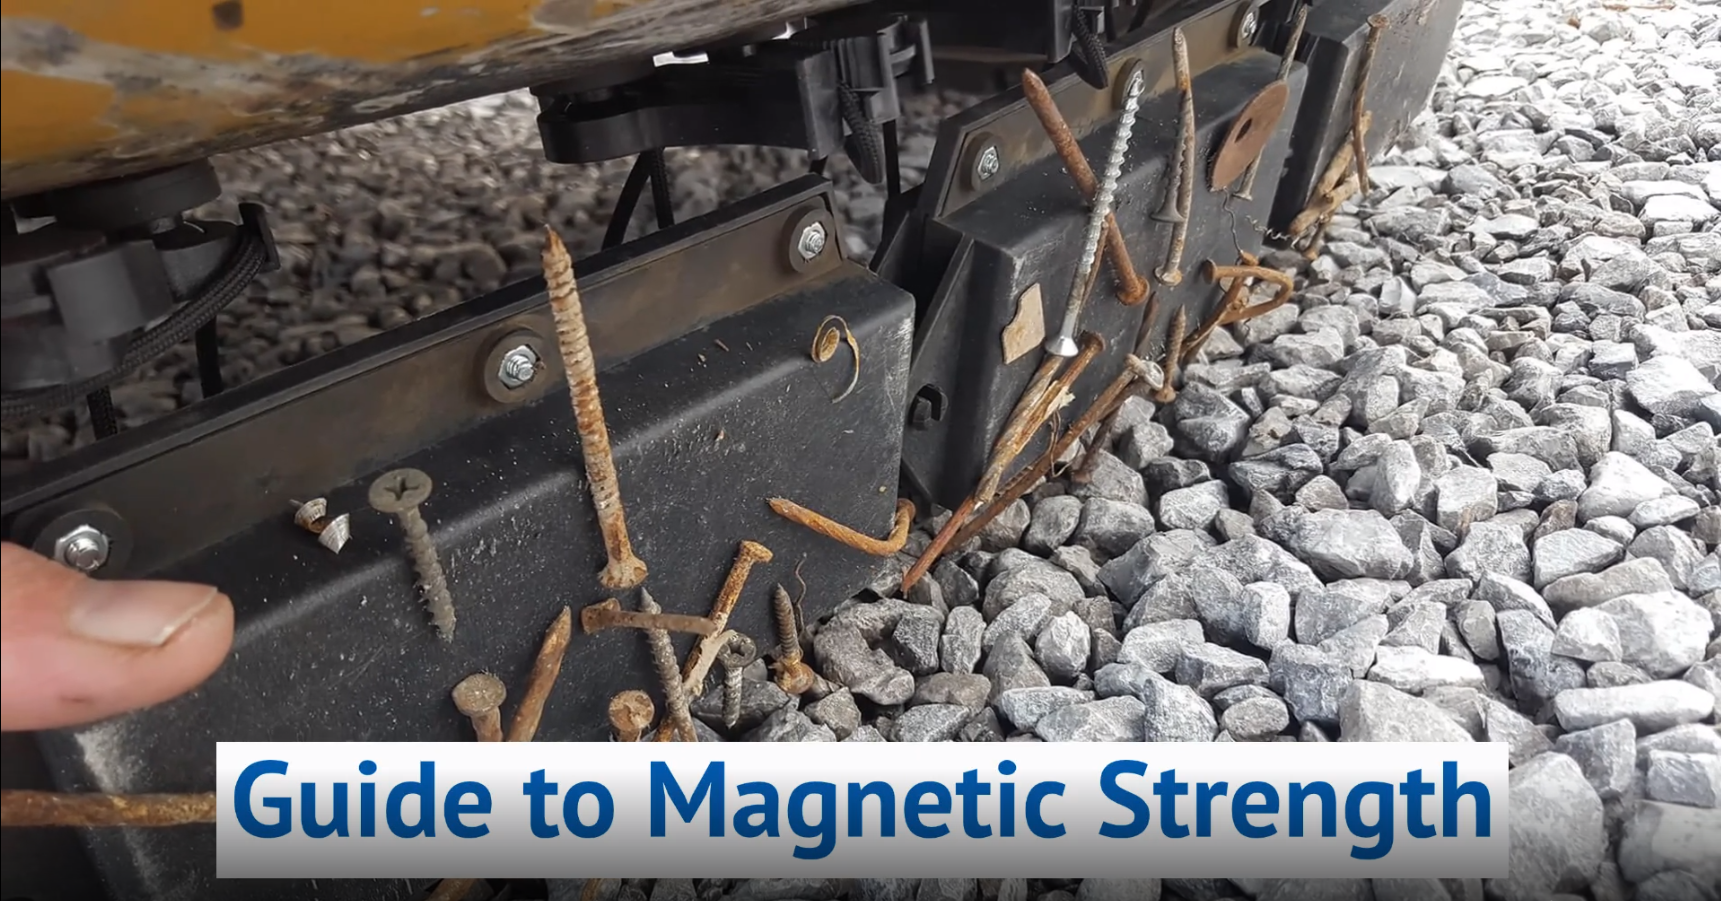 Magnetic Strength Video Cover Image